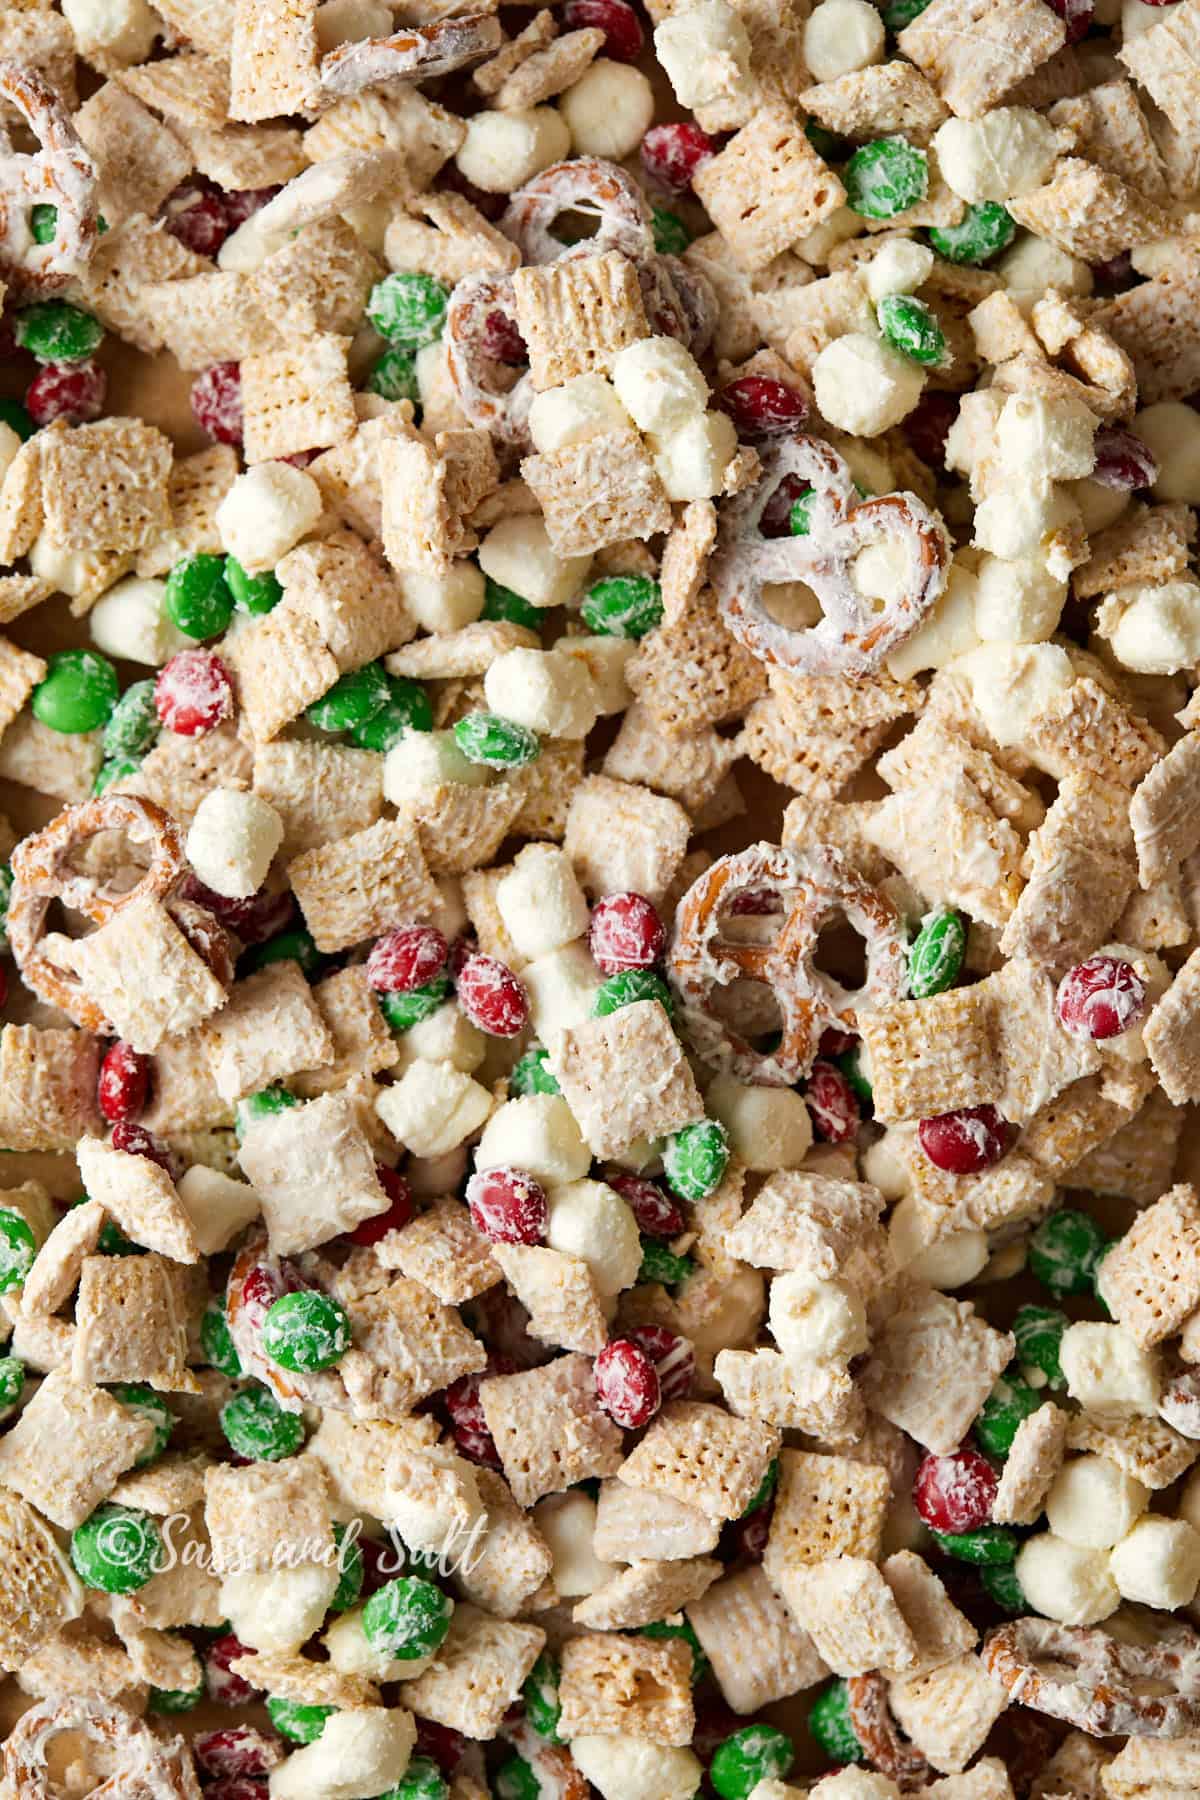 Overhead close up view of white chocolate Chex mix with M&M's.